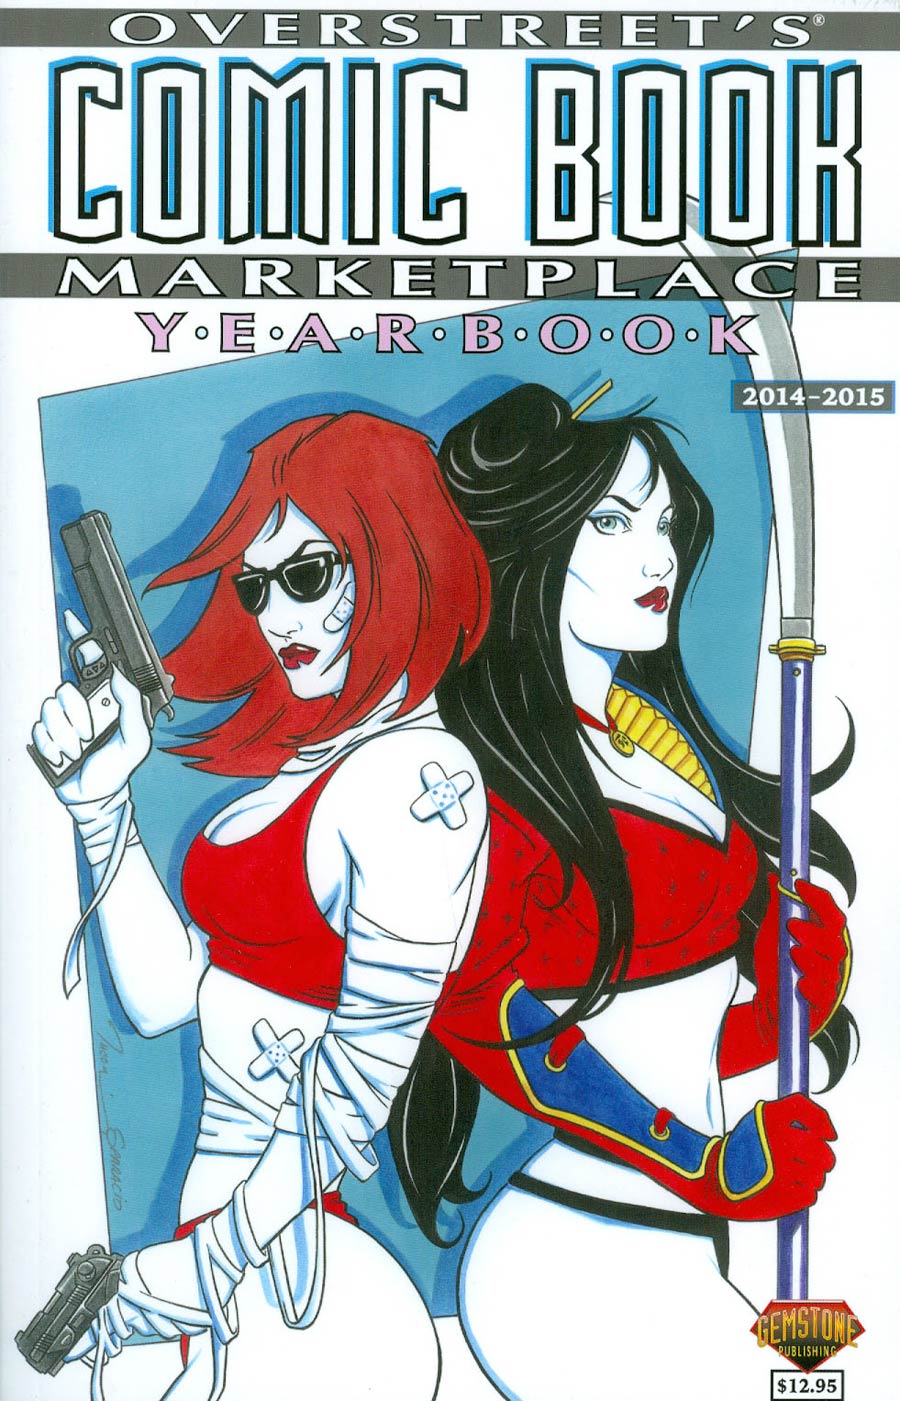 Overstreets Comic Book Marketplace Yearbook 2014-2015 Shi Painkiller Jane Cover